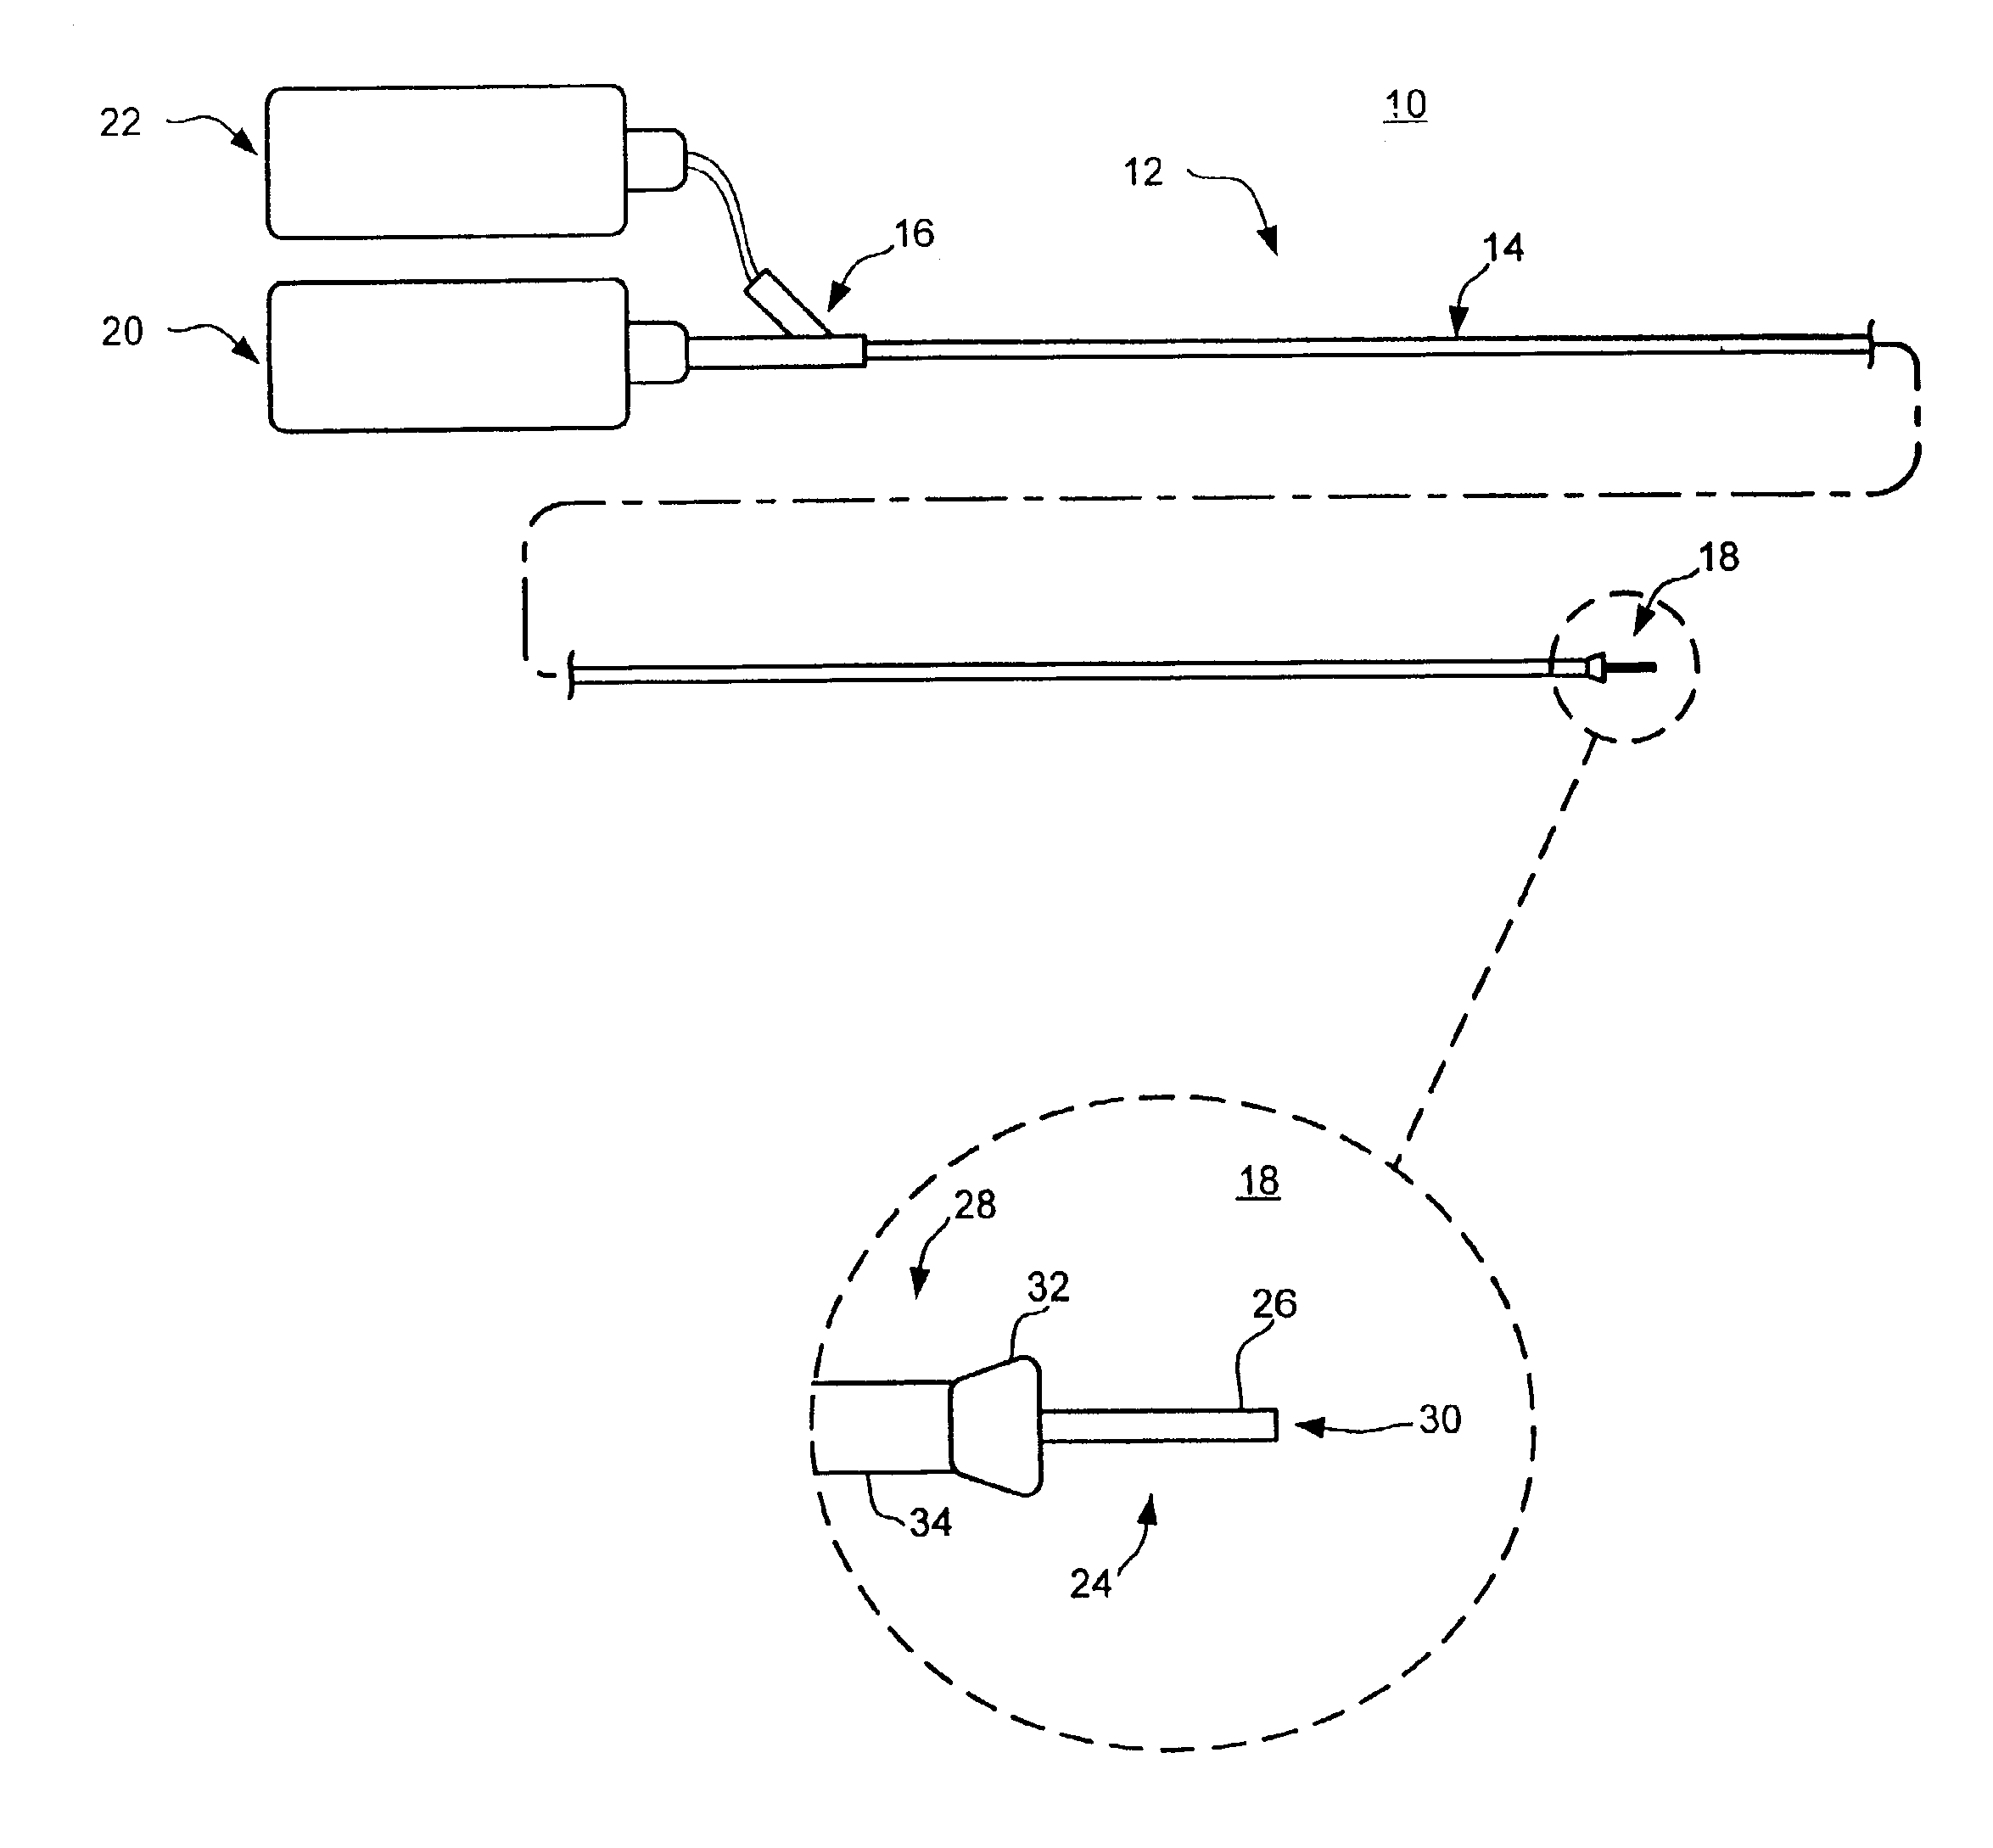 Needle-less injection apparatus and method